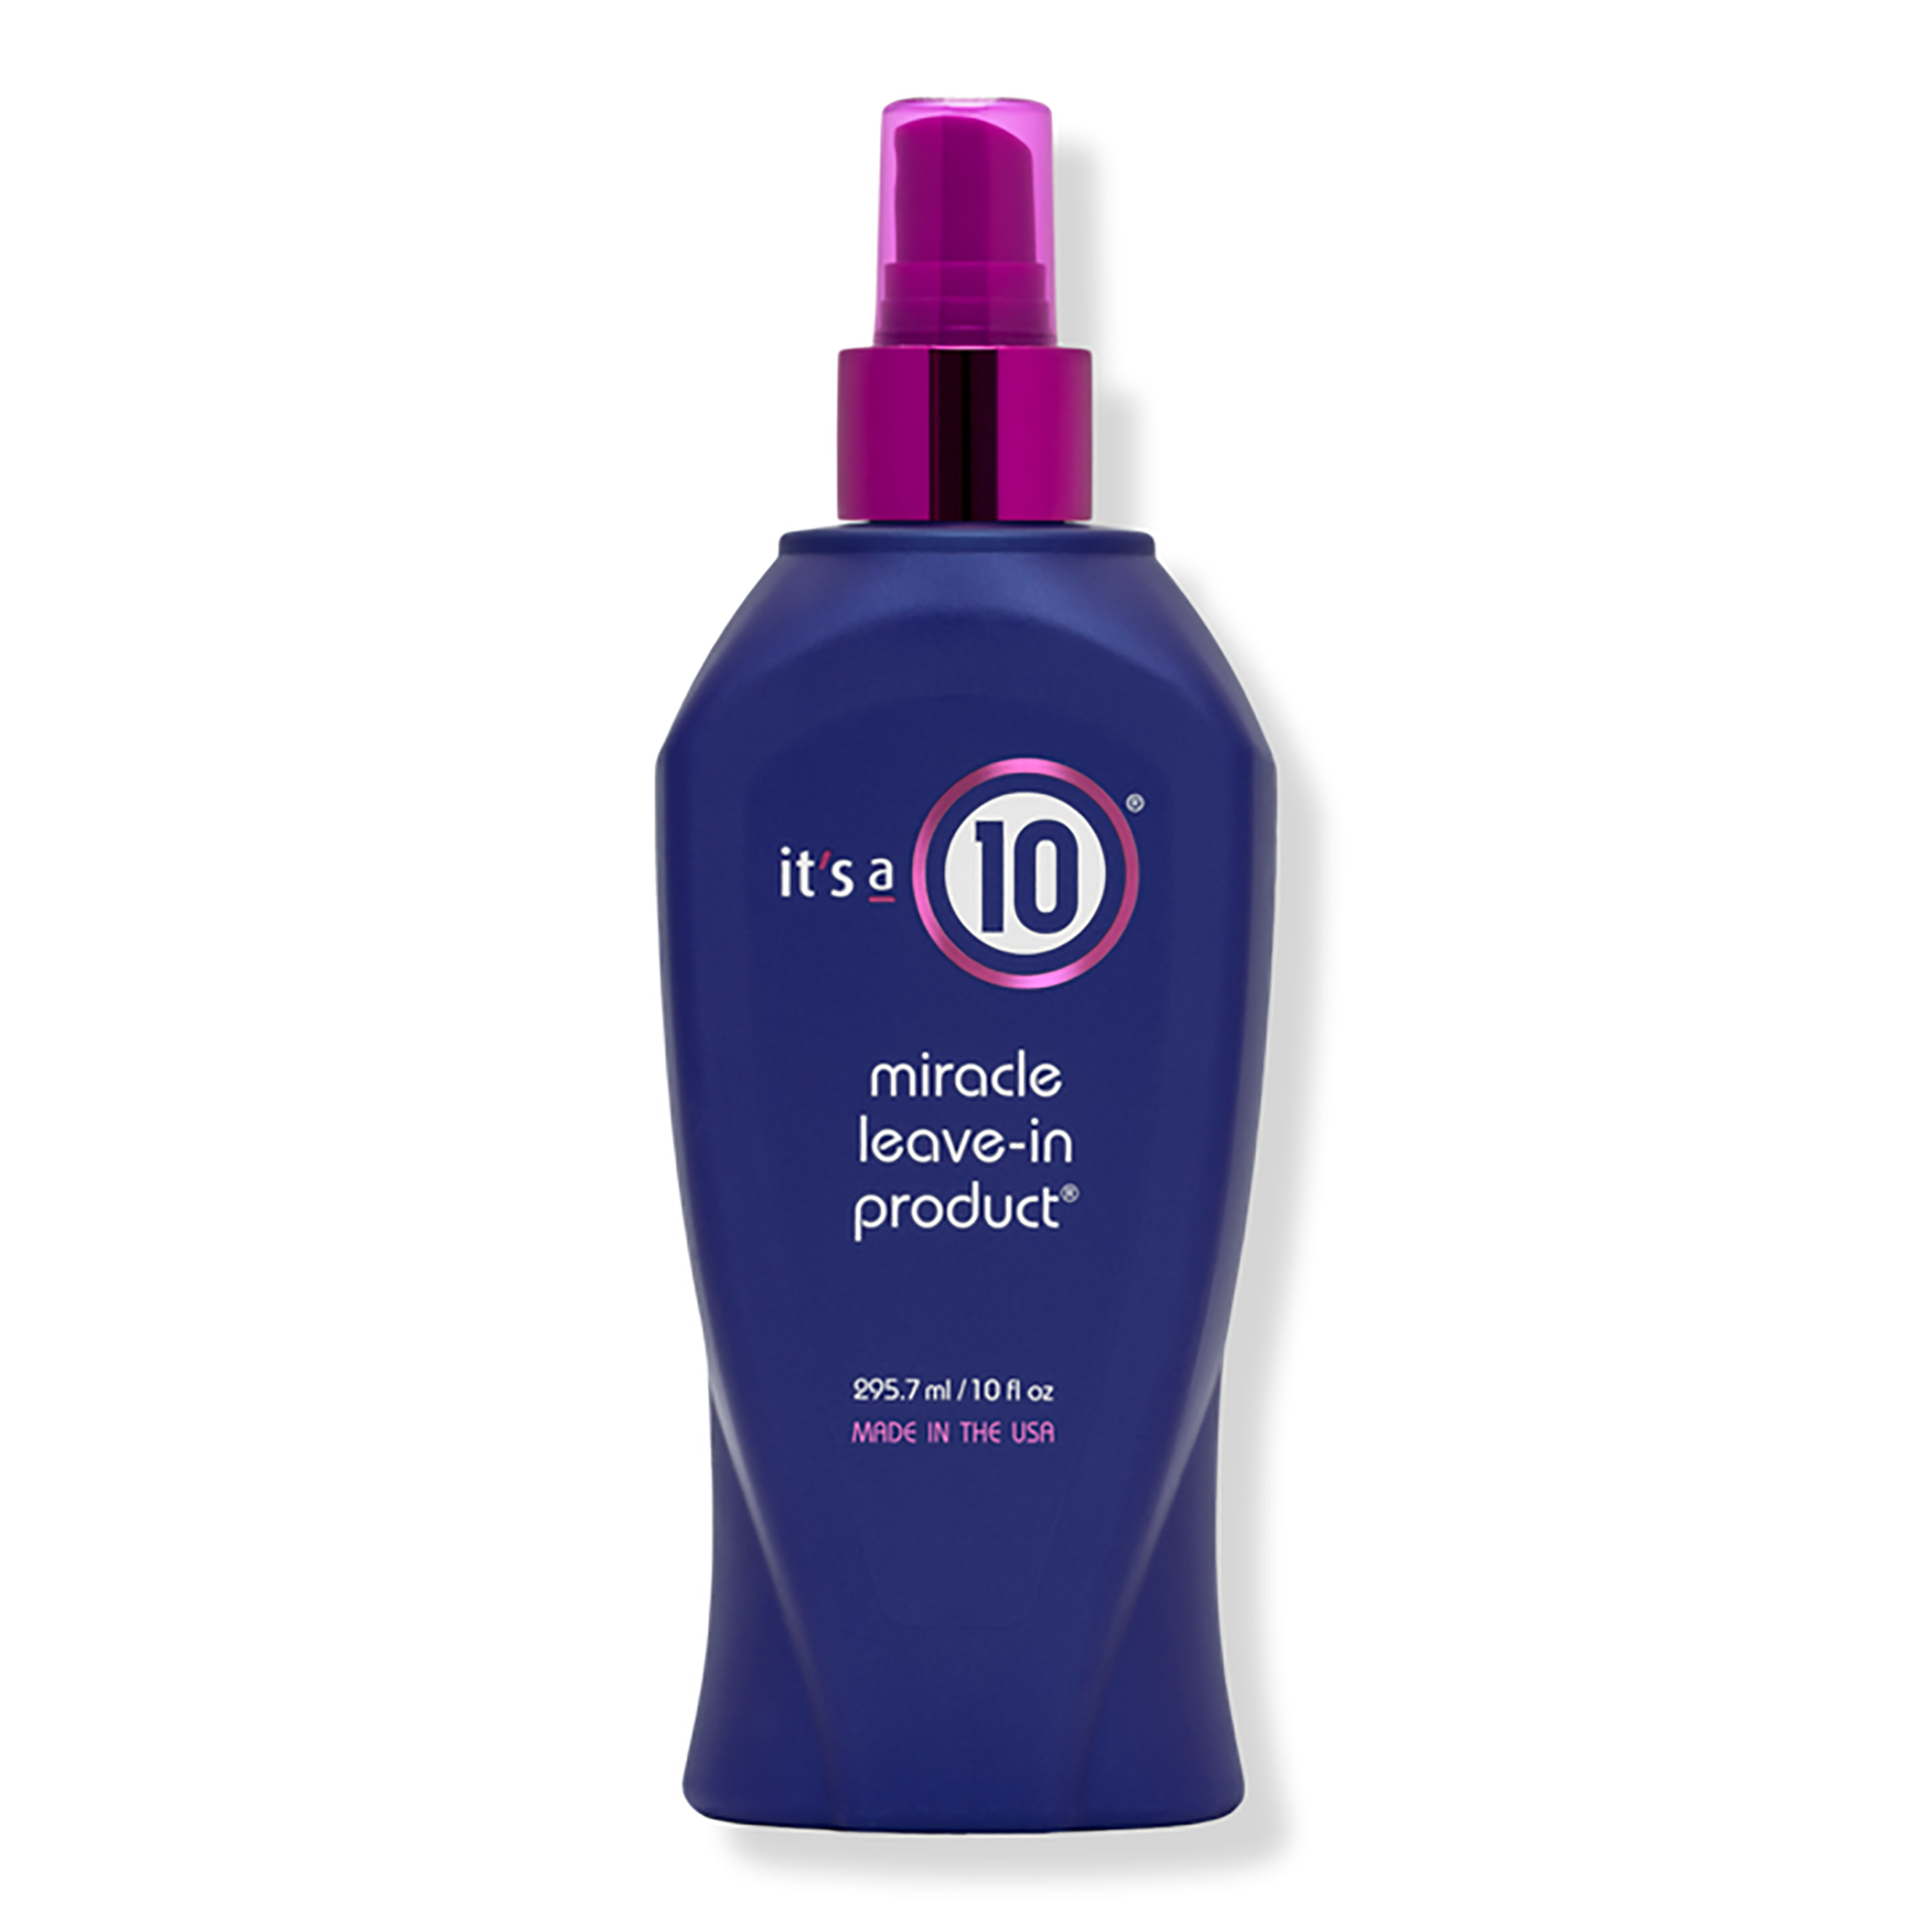 It's a 10 Miracle Leave-In Treatment Spray / 10